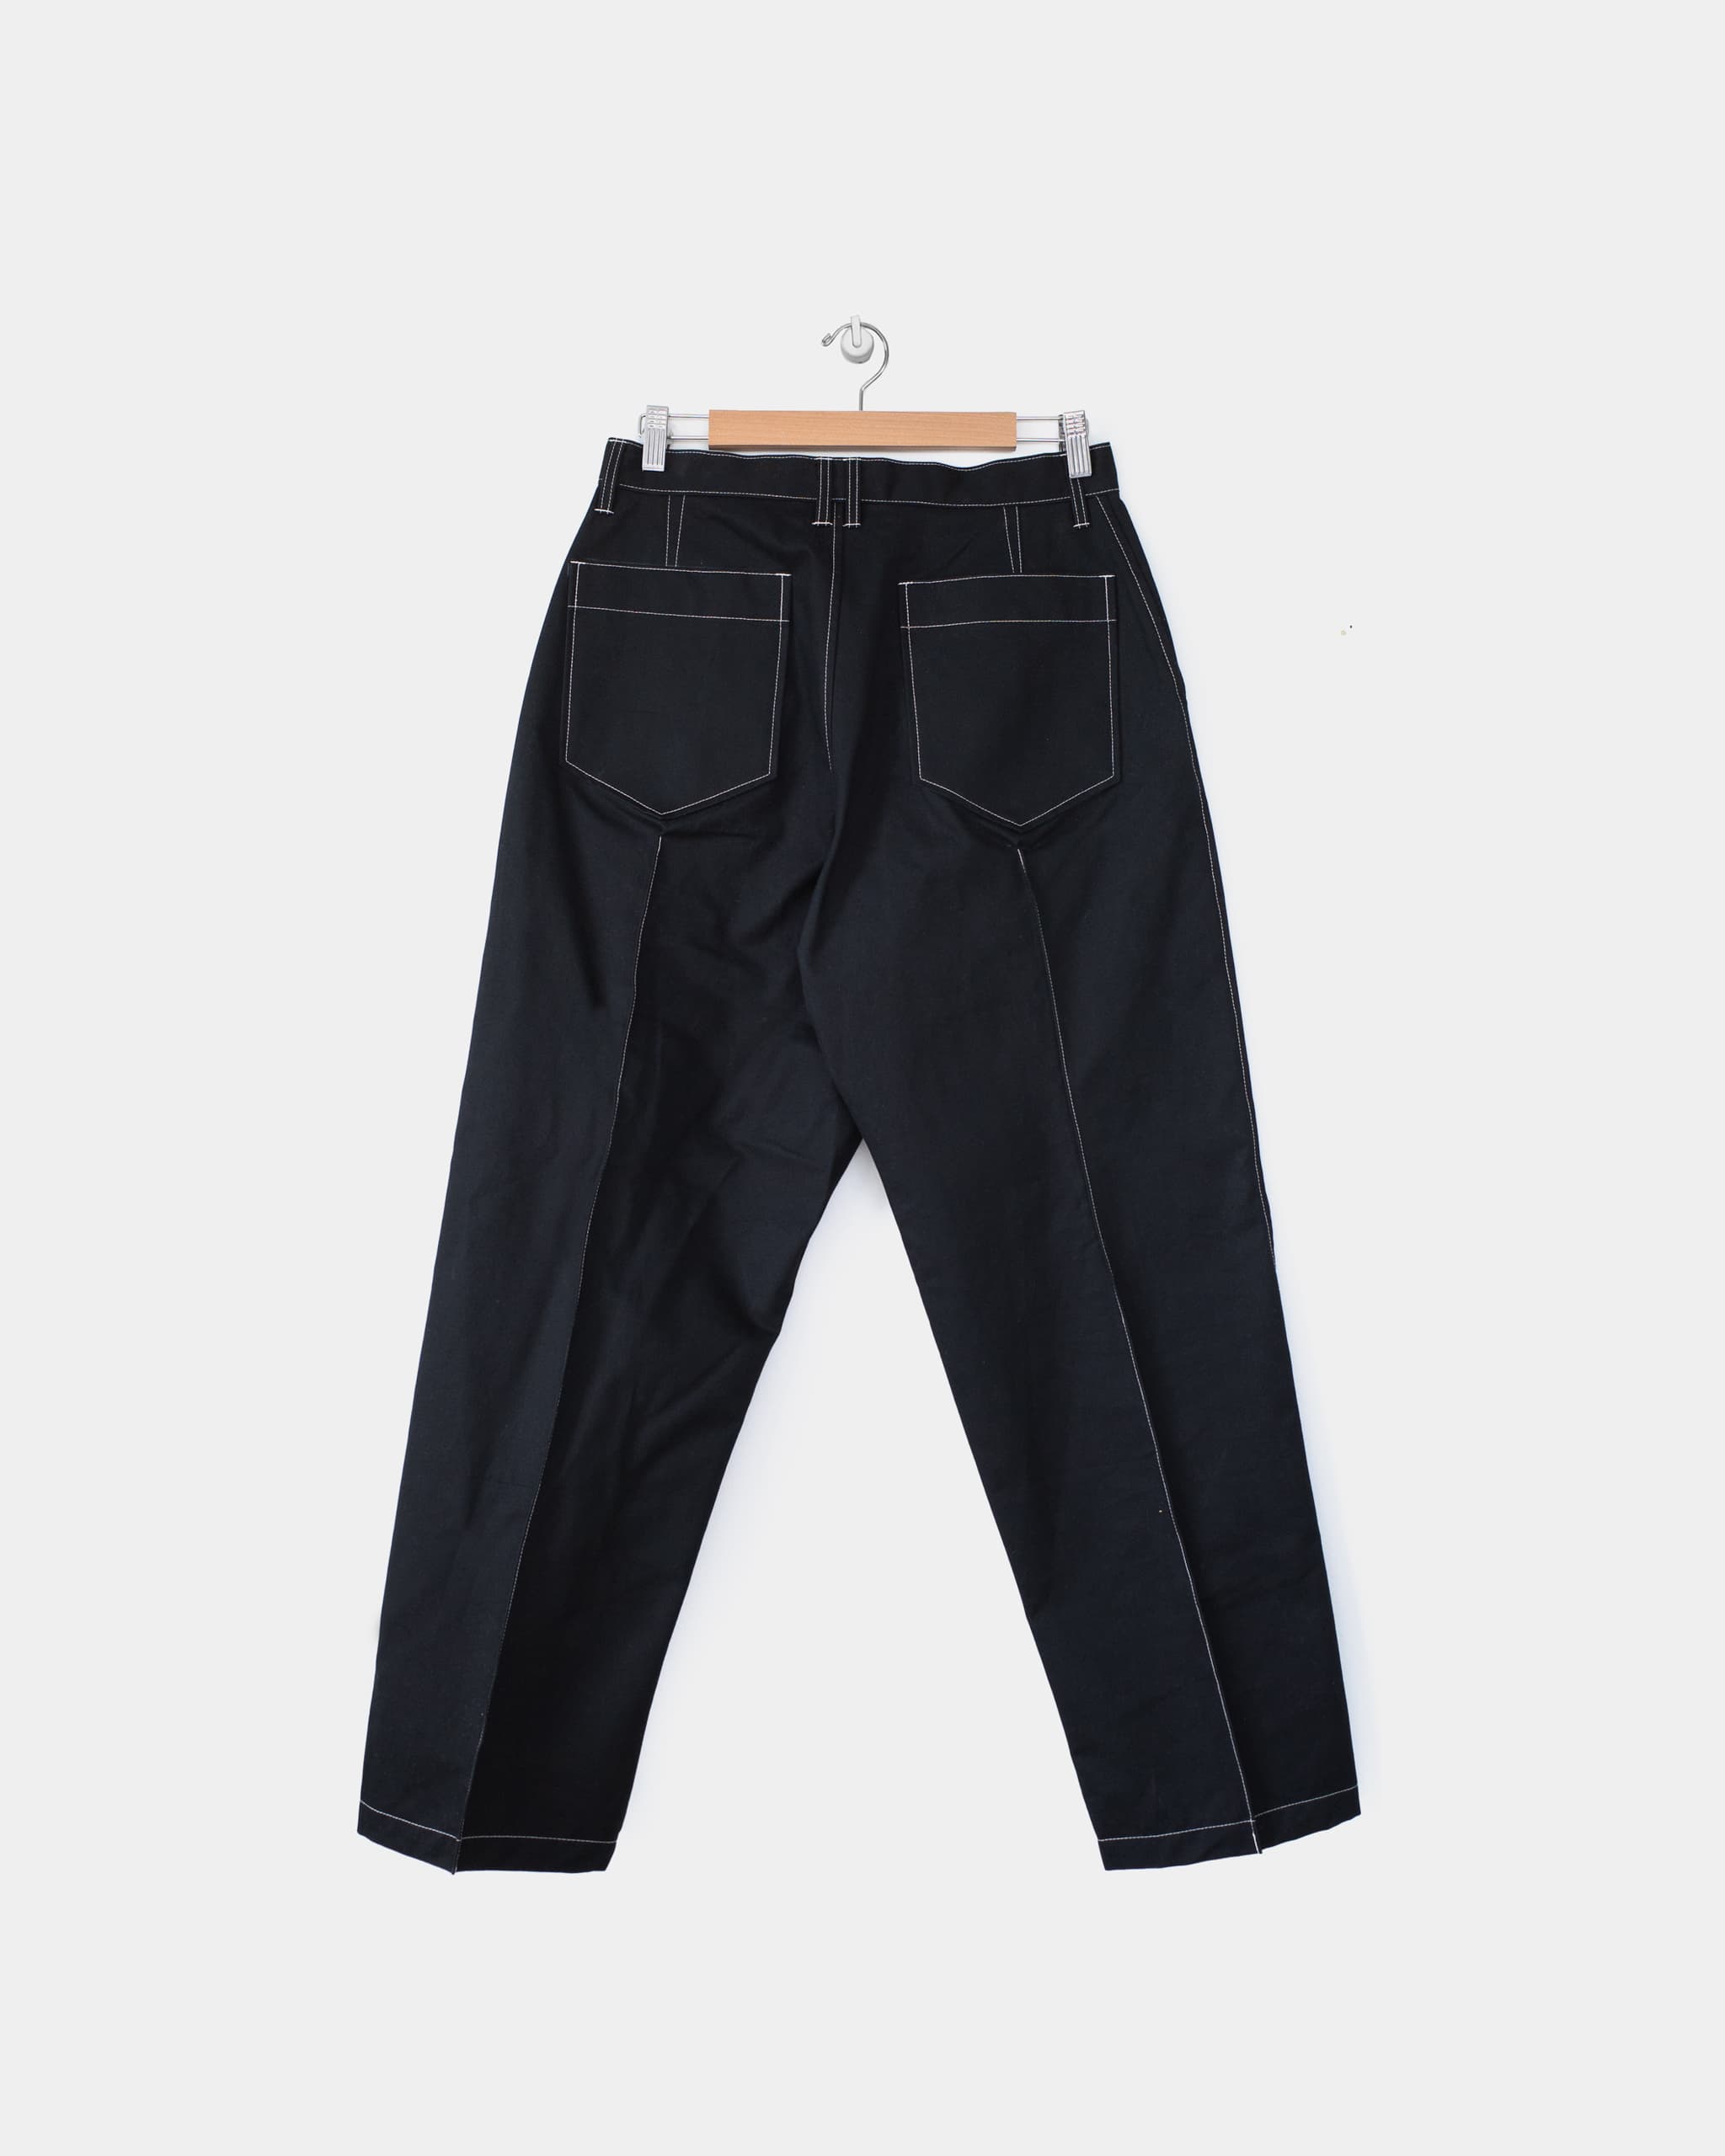 Stitched Crease Trouser - Black Drill - James Coward